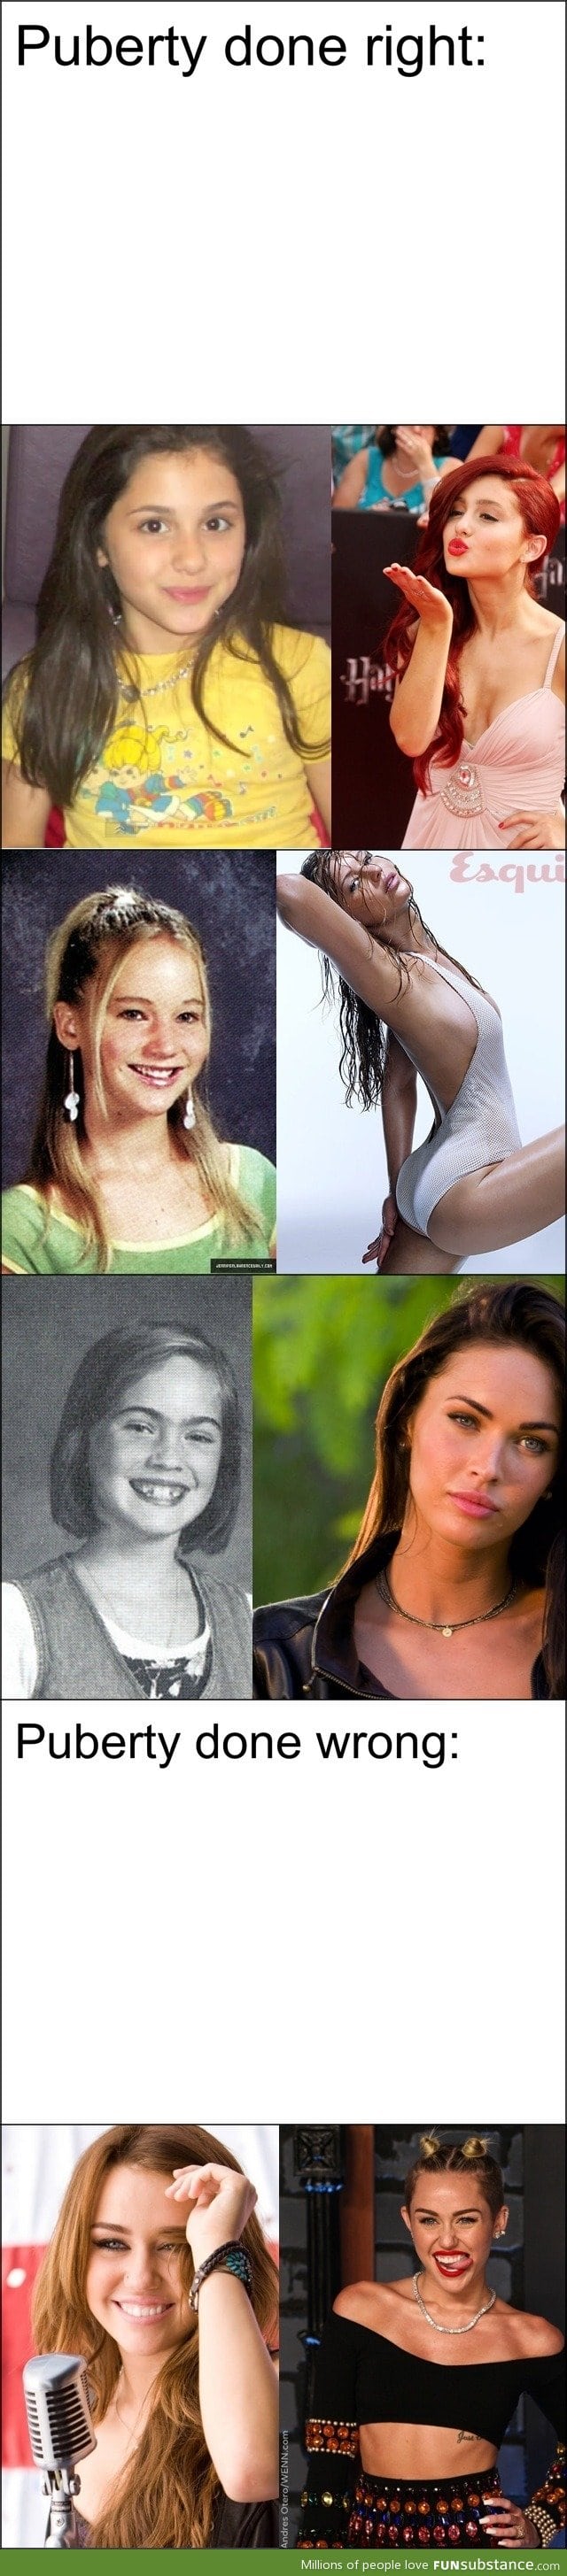 Puberty done right and wrong